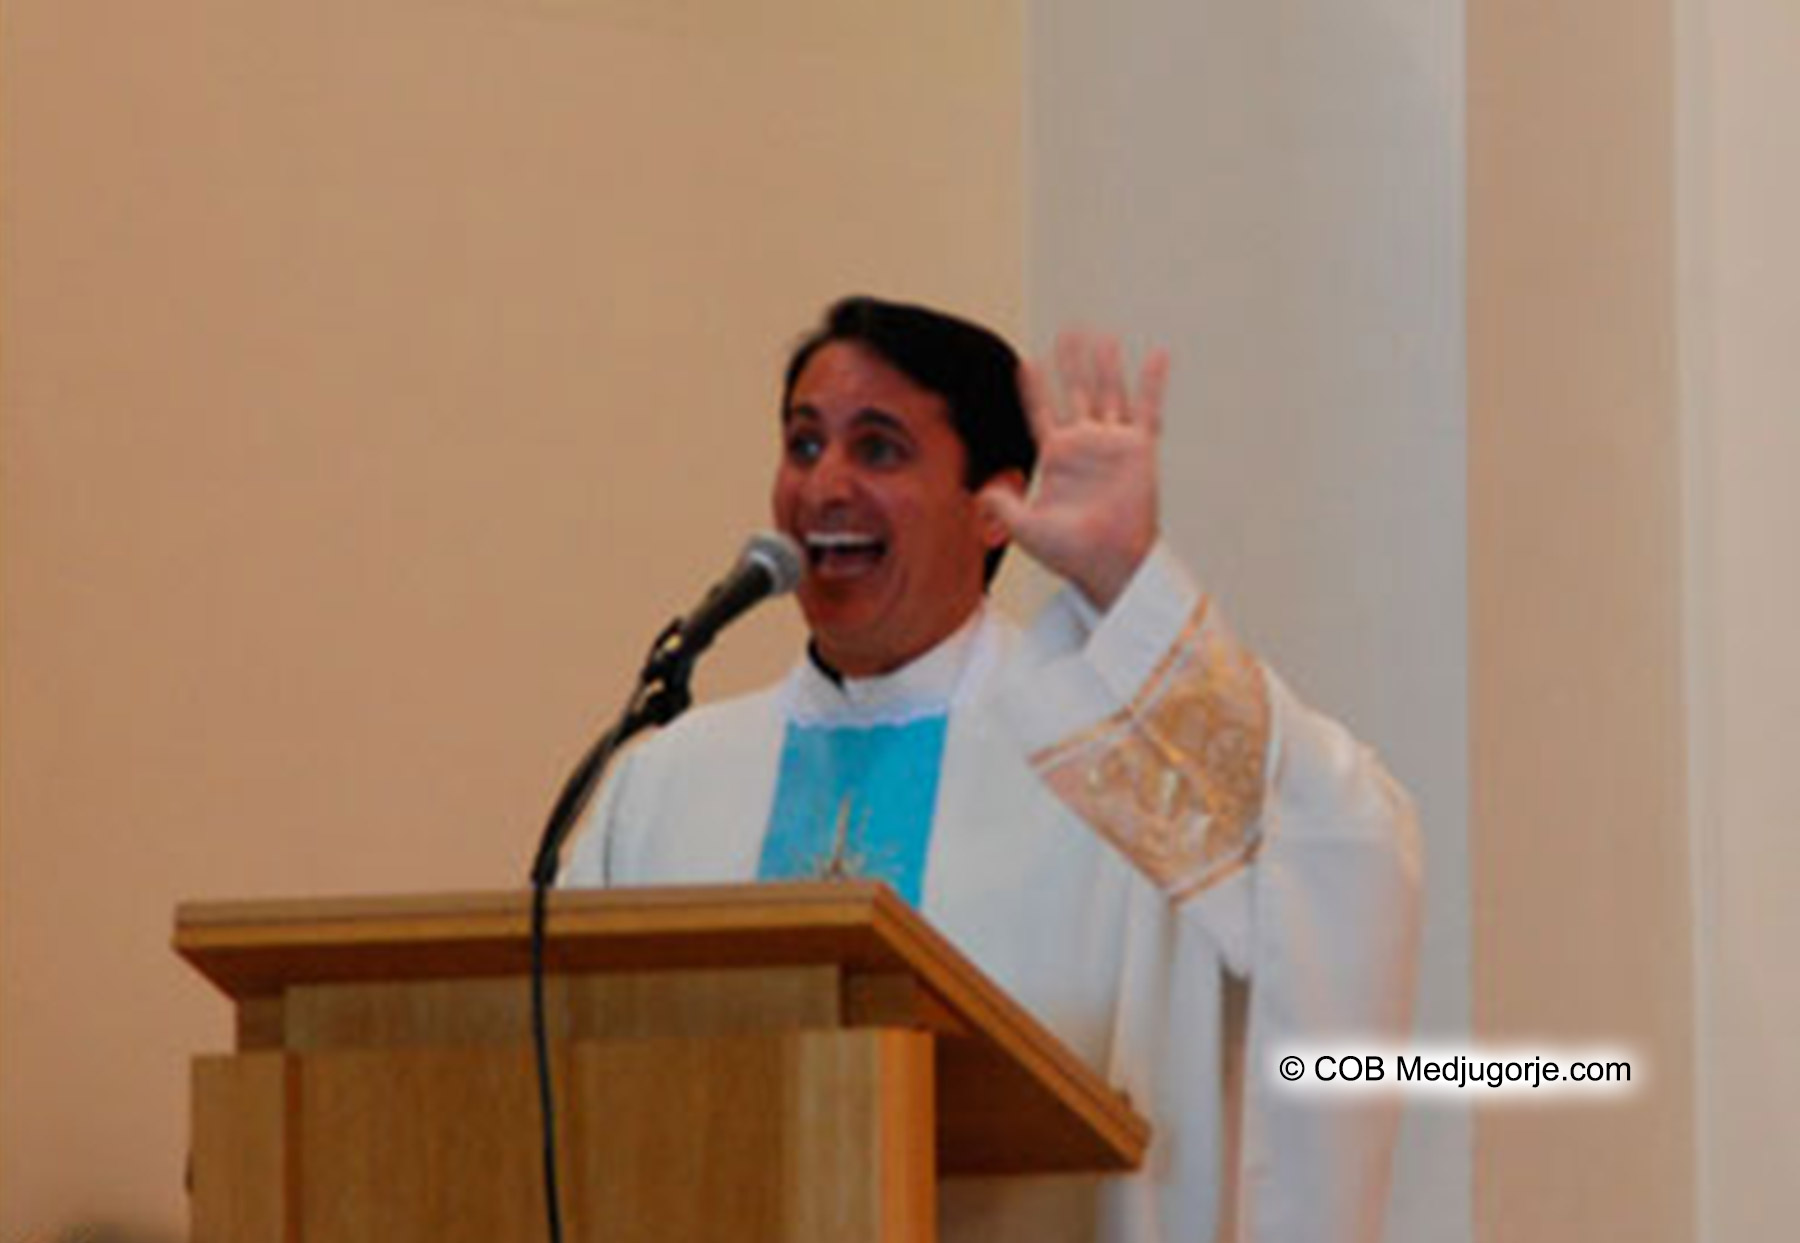 Fr. Charles Mangano exciting laughter at the pulpit of St. James Church in Medjugorje